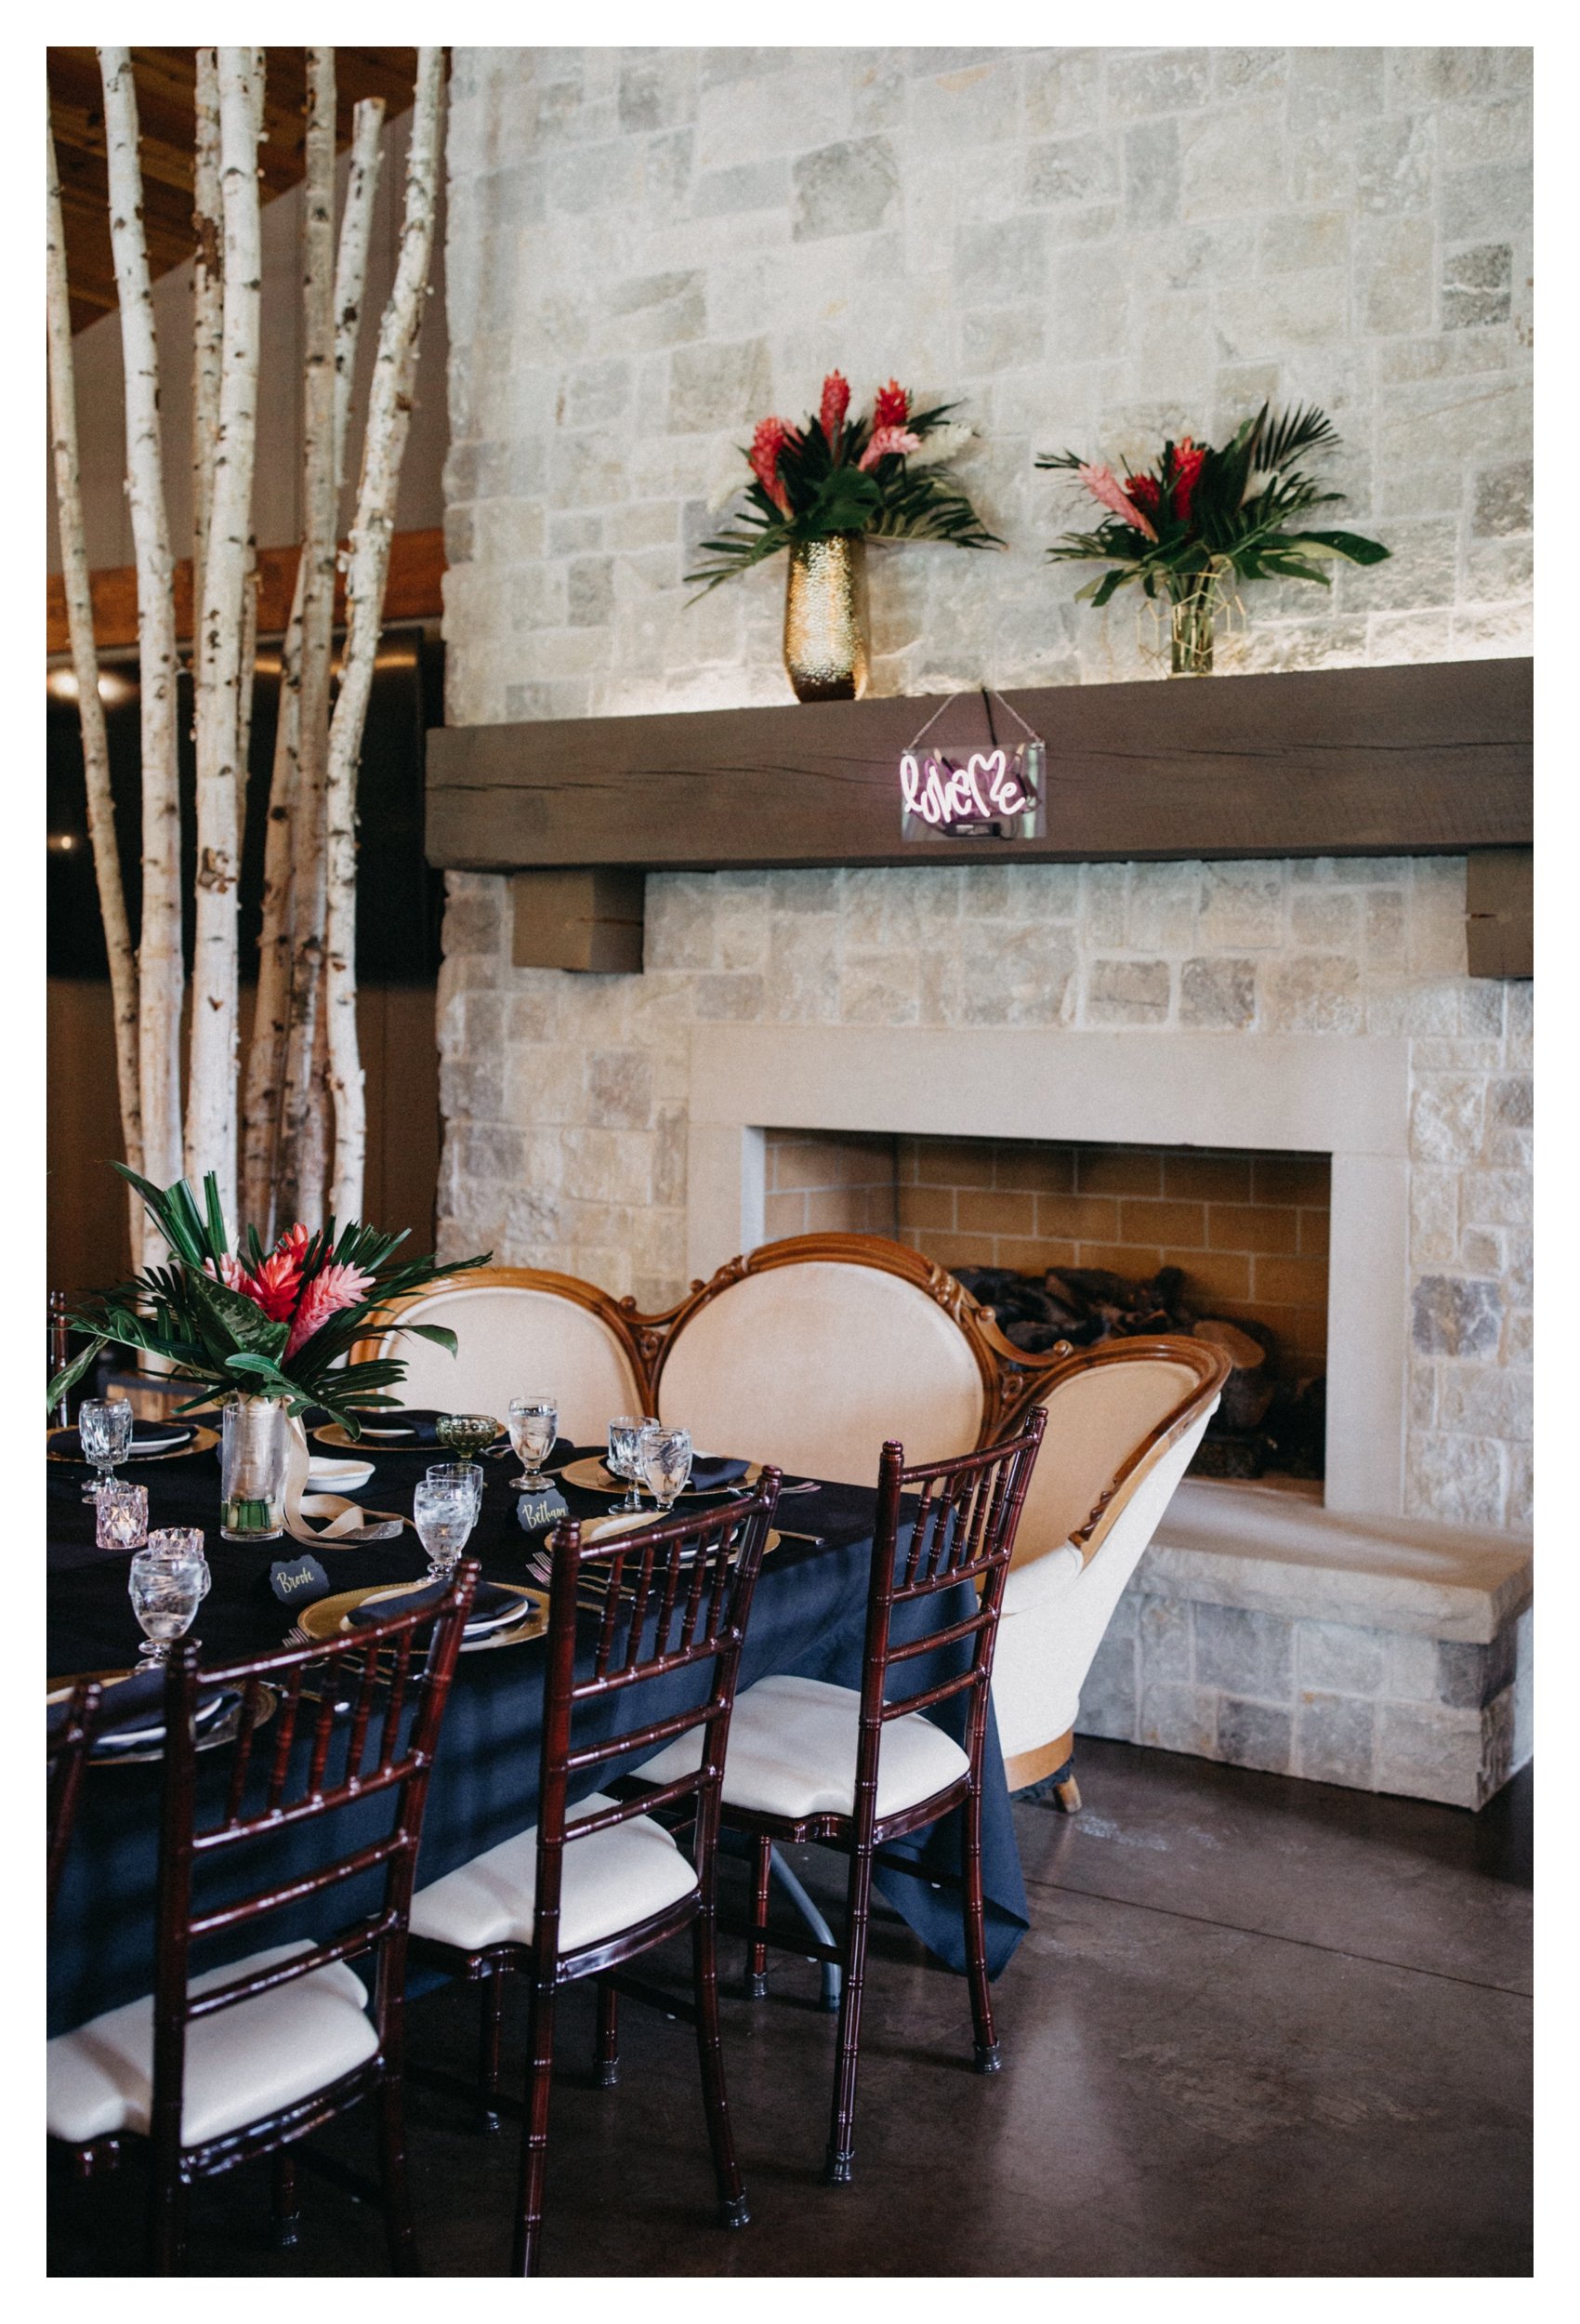 Luxury wedding table setting in front of fireplace at 7 vines vineyard wedding reception